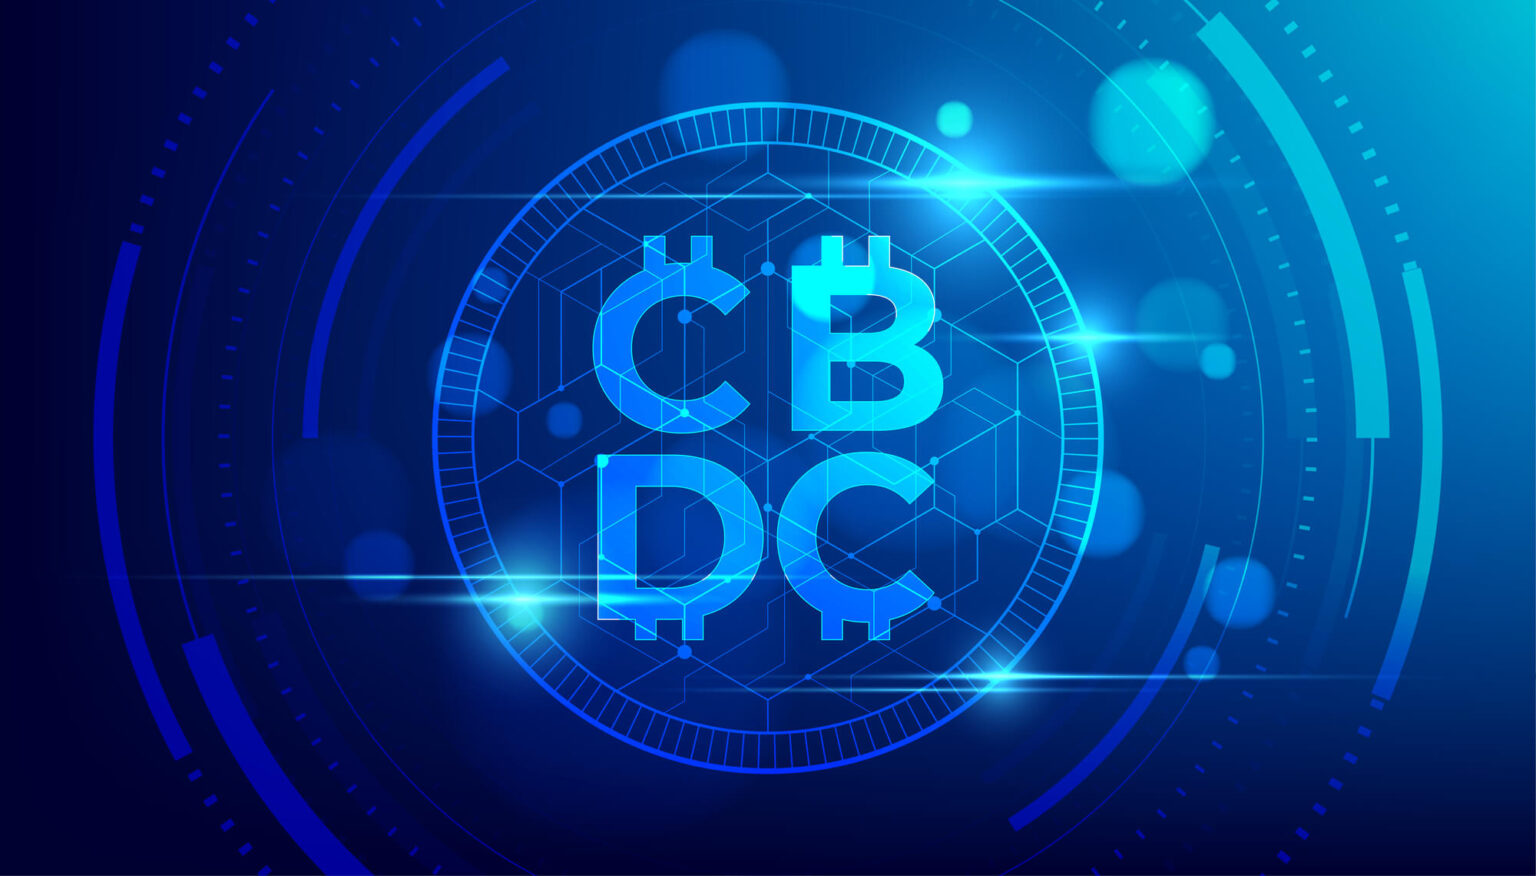 What Are Central Bank Digital Currencies (CBDCs)?​